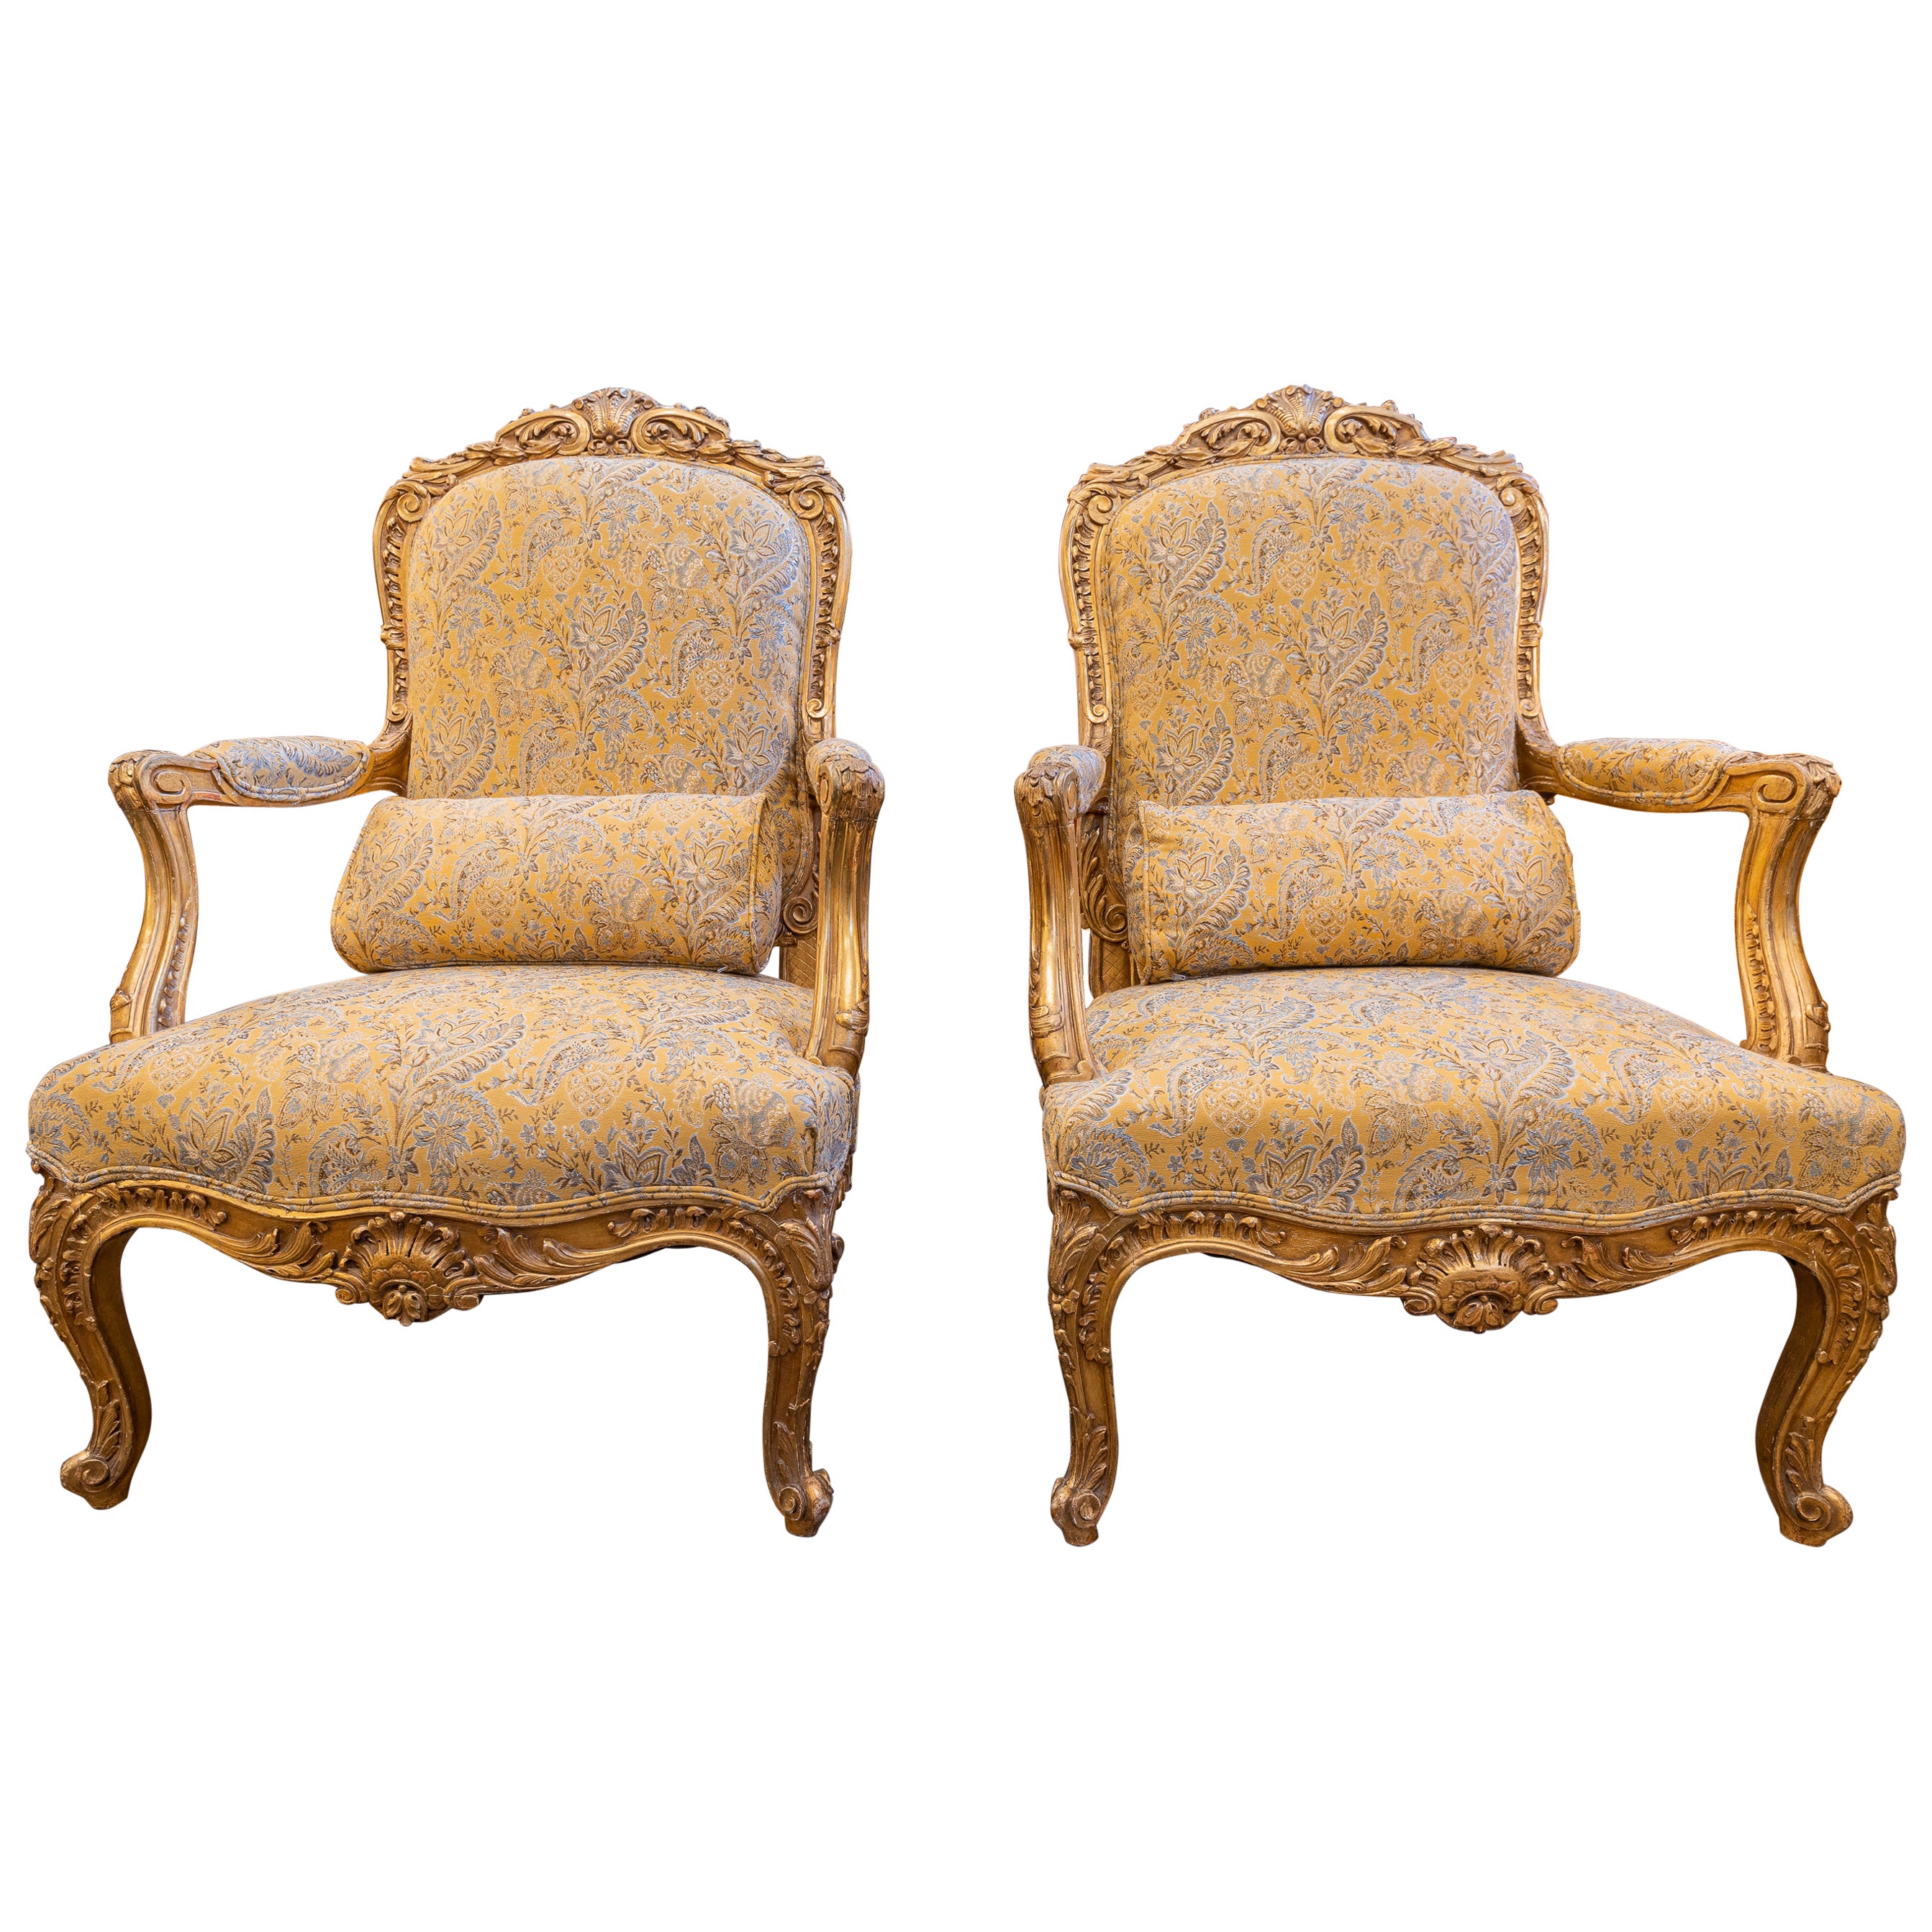 Stunning Louis XV Parlor Chair with Napoleonic Crest Fabric